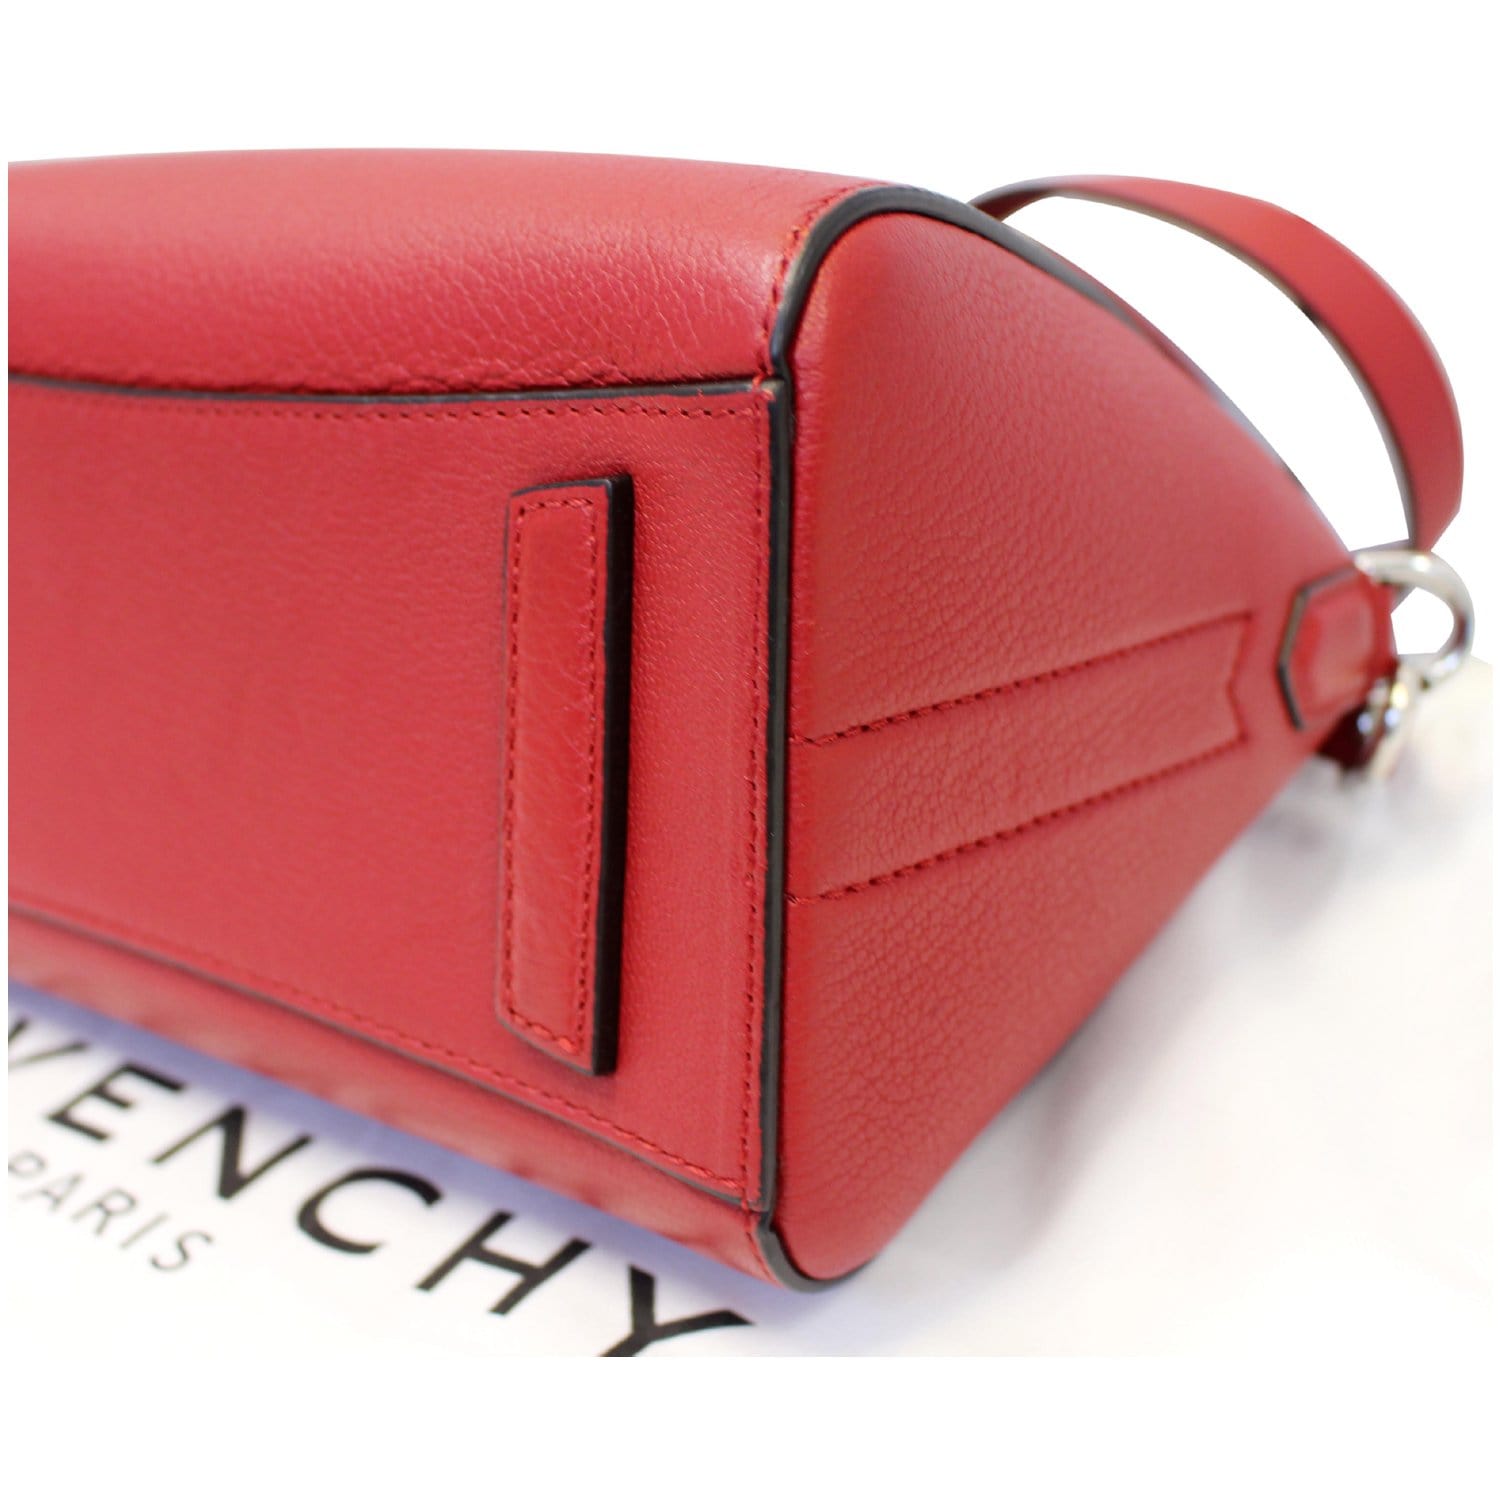 Givenchy Red Leather Antigona Micro Shoulder Bag *Pre Owned* FREE SHIPPING